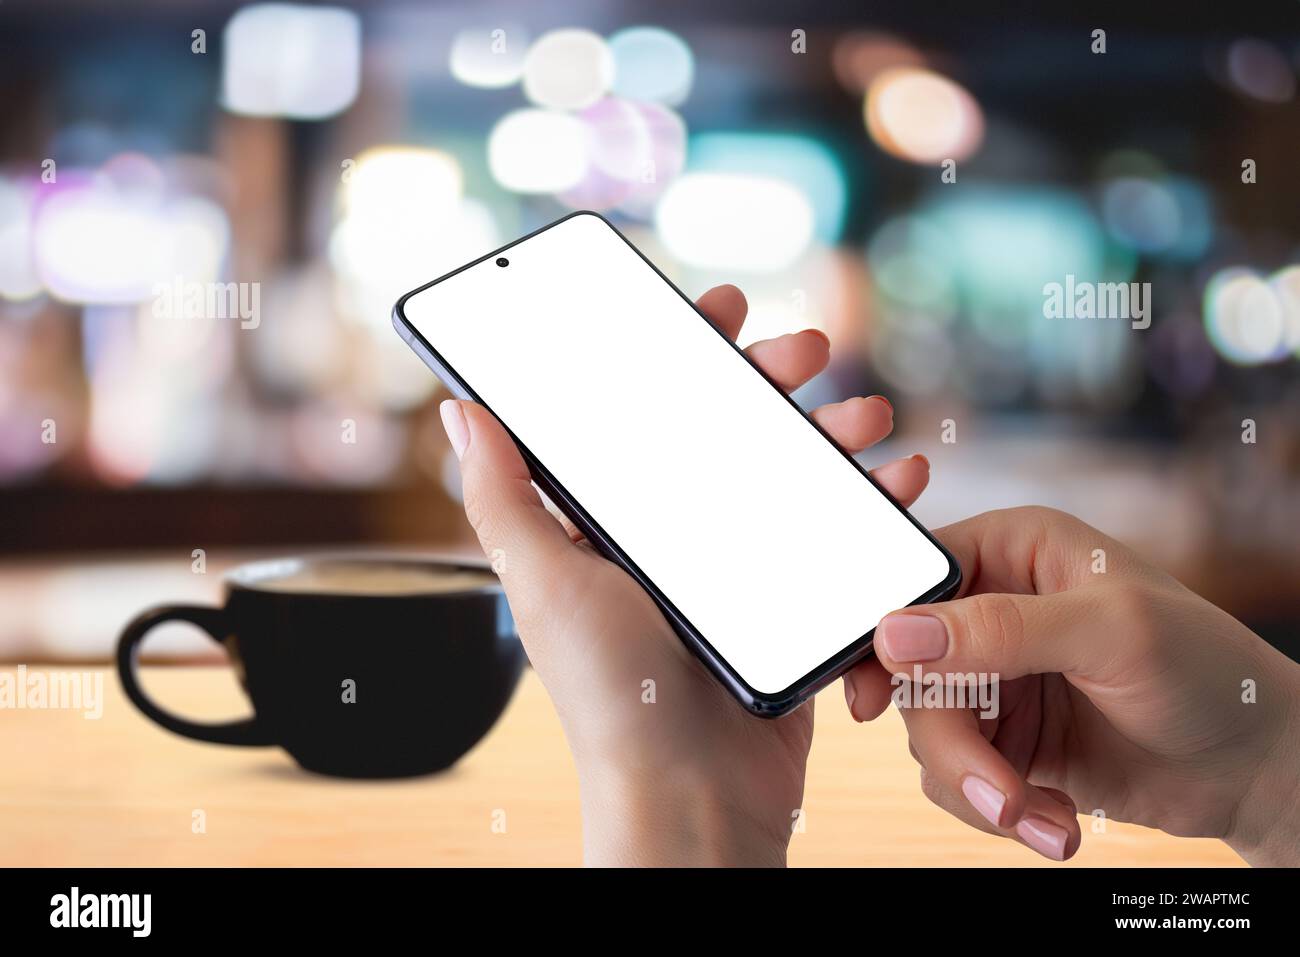 Smartphone mockup in hands with coffee mug on table, creating a cozy coffee time reading news concept. Perfect for showcasing digital content in a rel Stock Photo